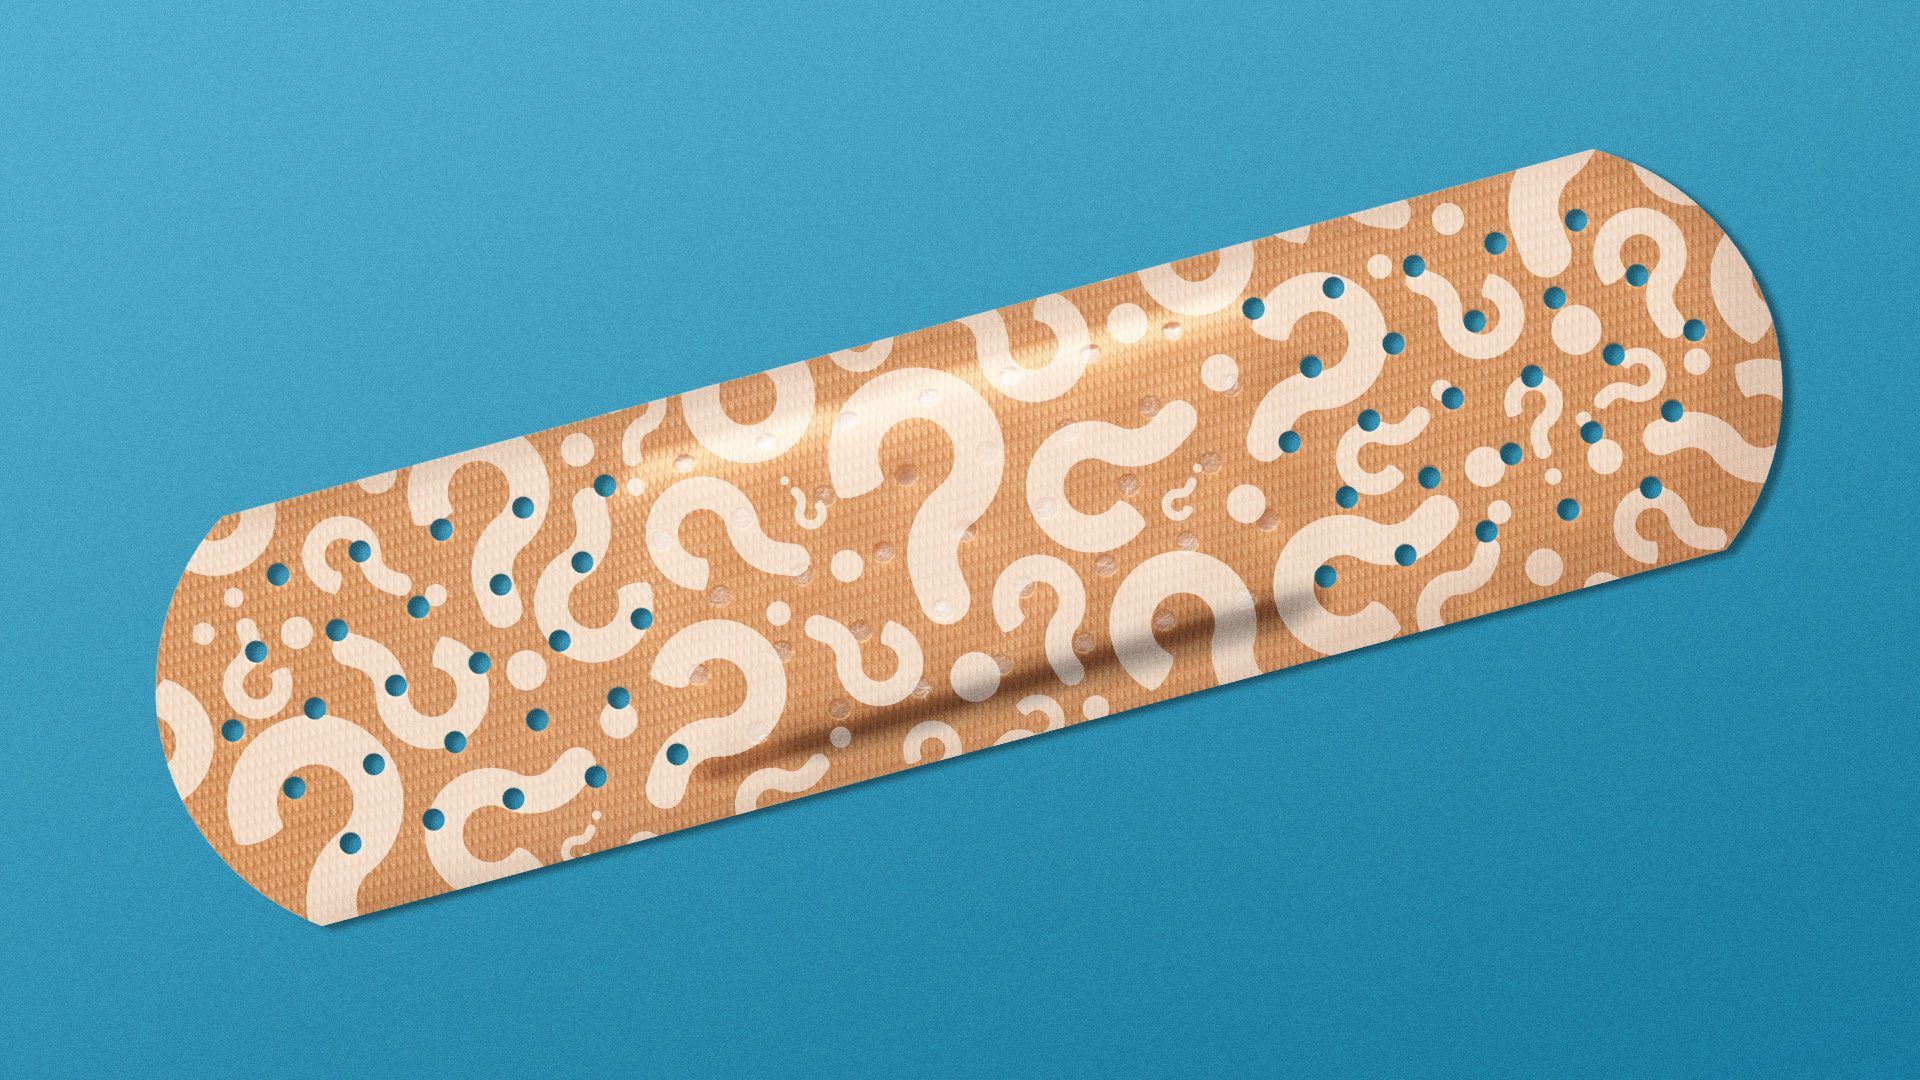 Illustration of a band-aid with a question mark pattern